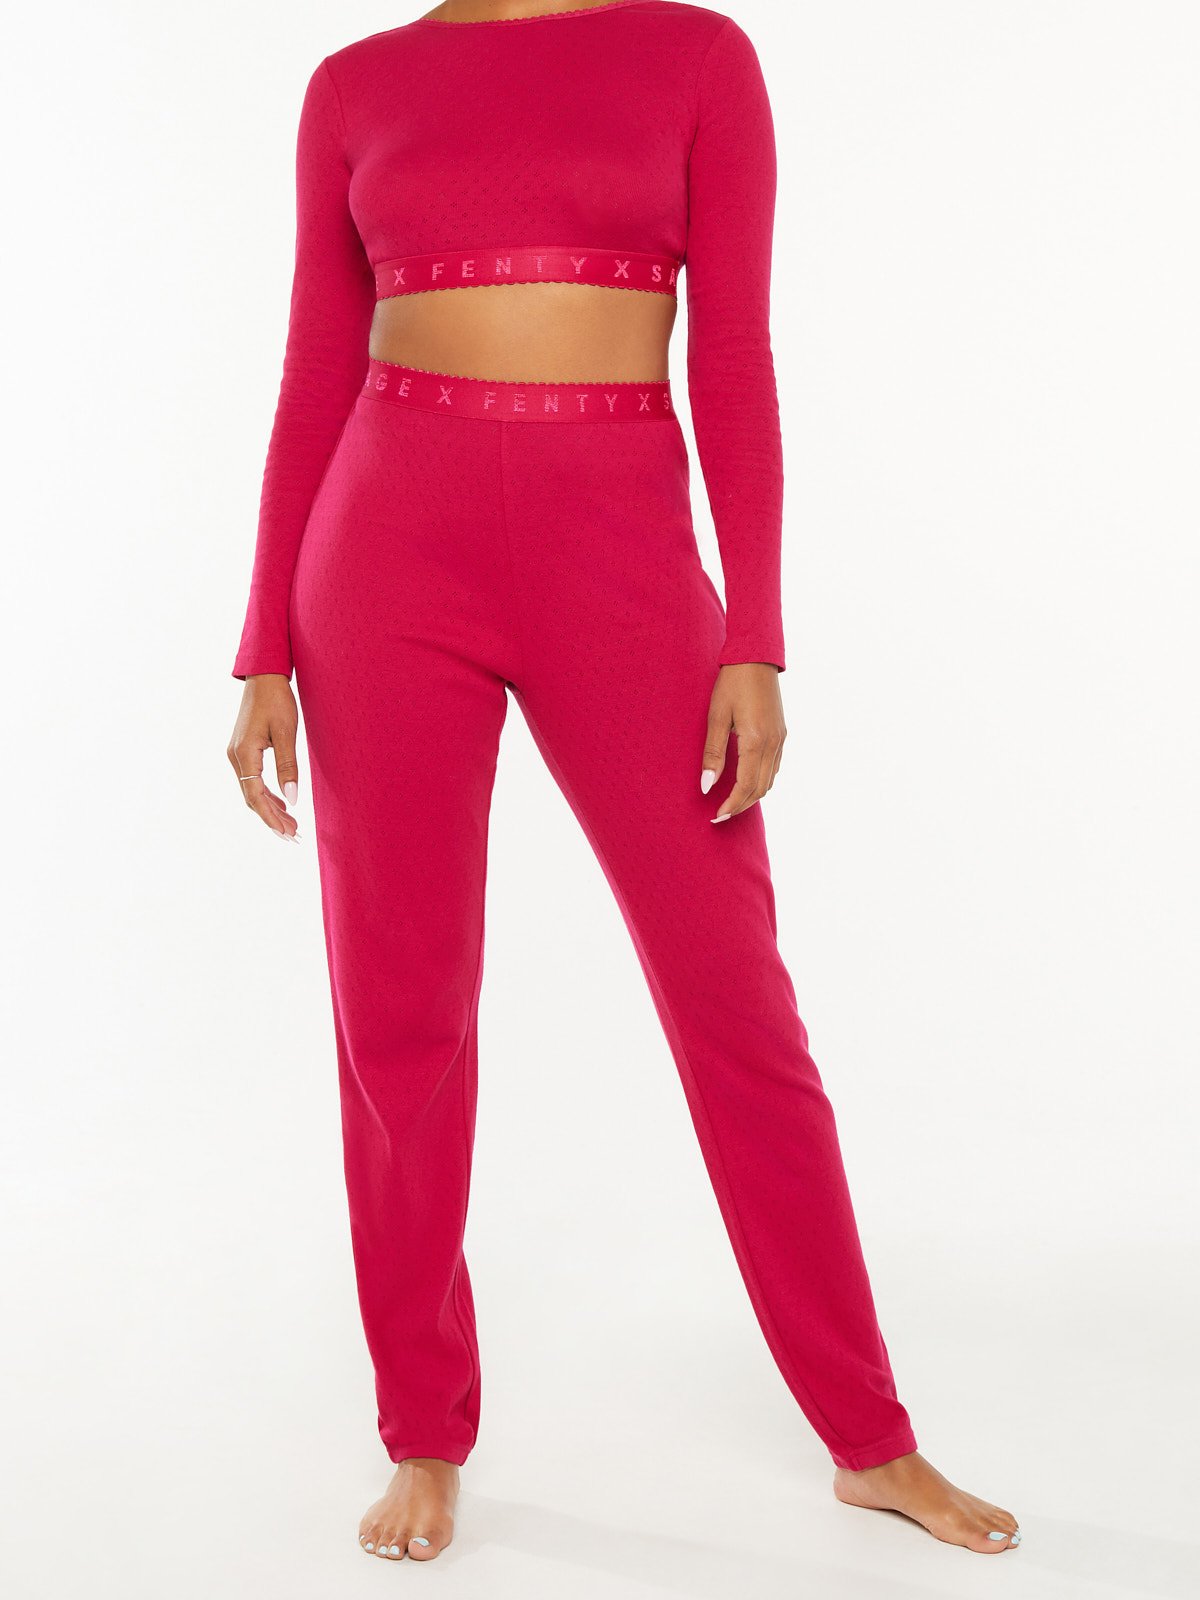 Savage X Cotton Jersey Sleep Pant in Pink & Red